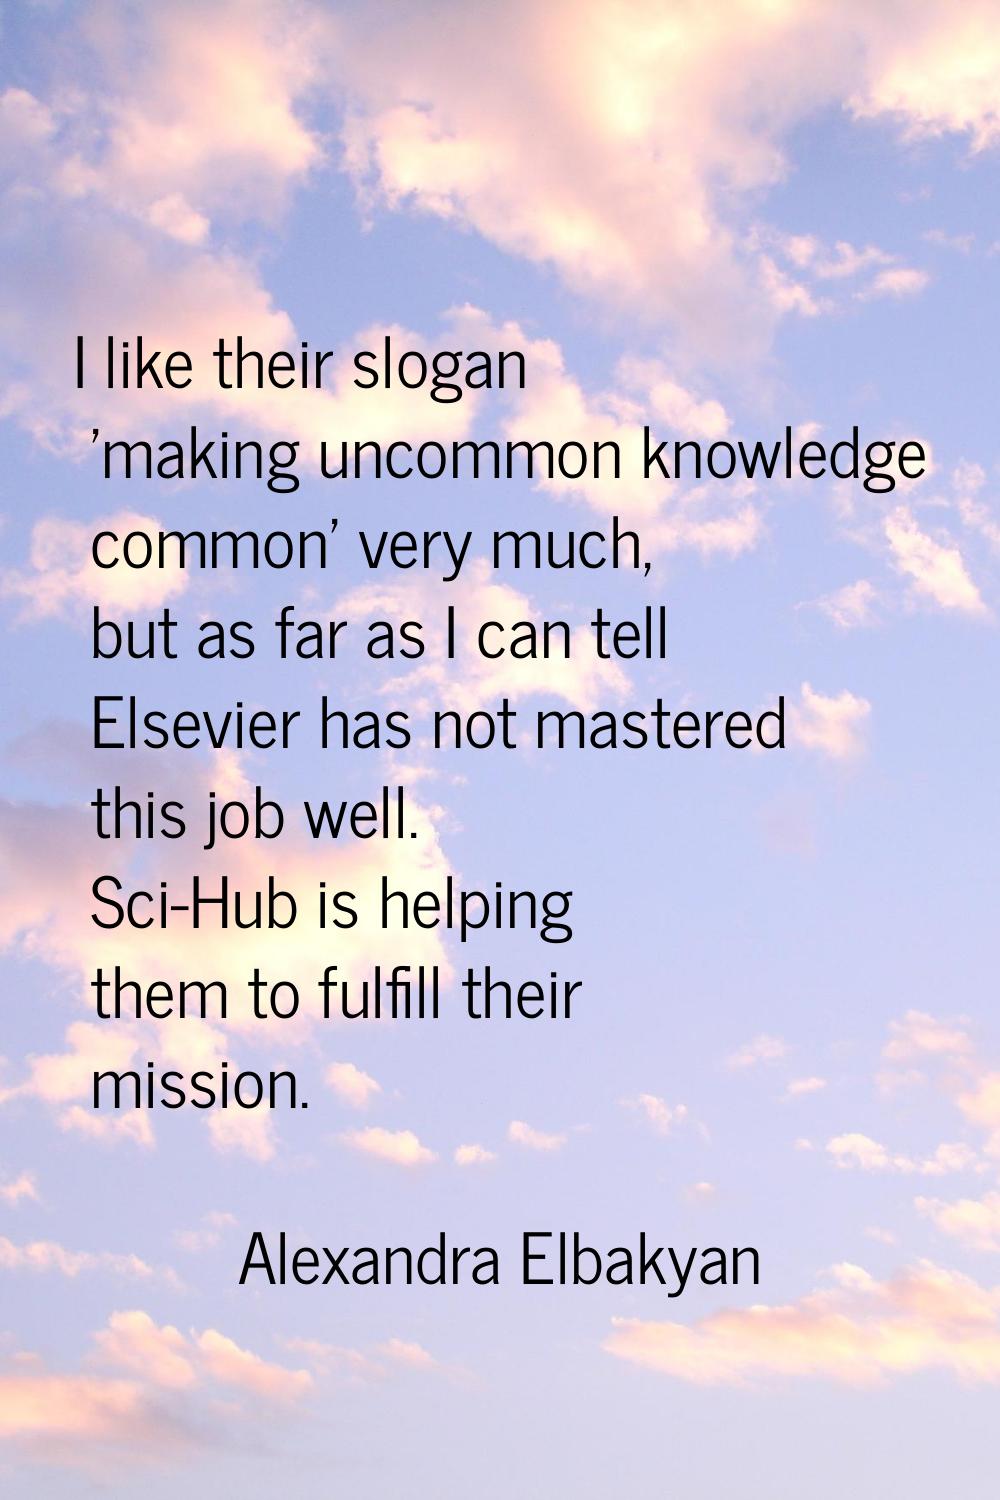 I like their slogan 'making uncommon knowledge common' very much, but as far as I can tell Elsevier